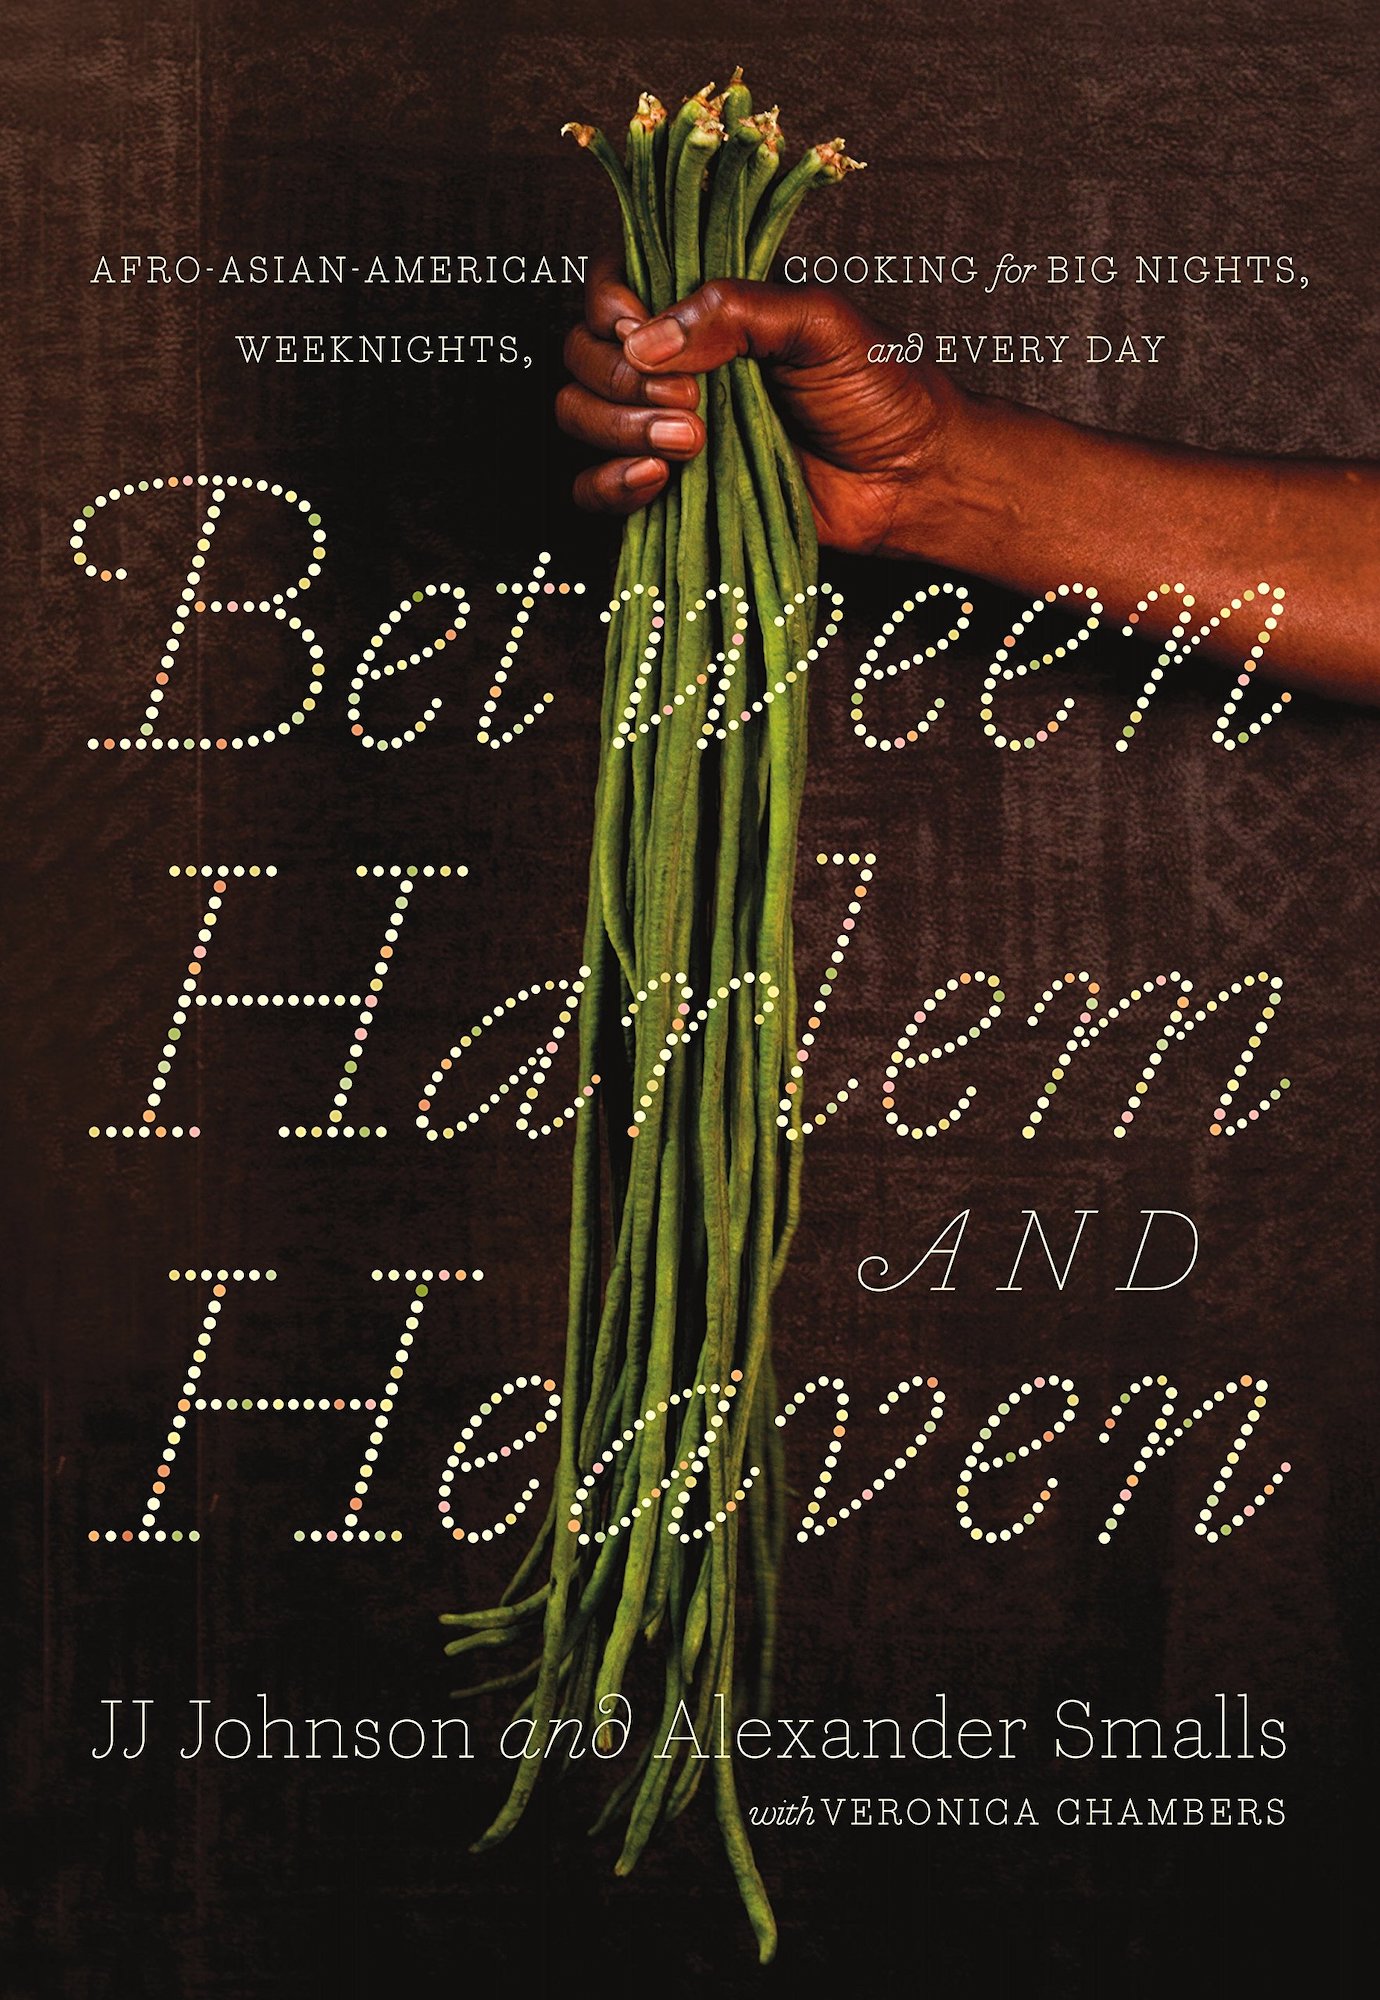 "Between Harlem and Heaven: Afro-Asian-American Cooking for Big Nights, Weeknights, and Every Day" cookbook